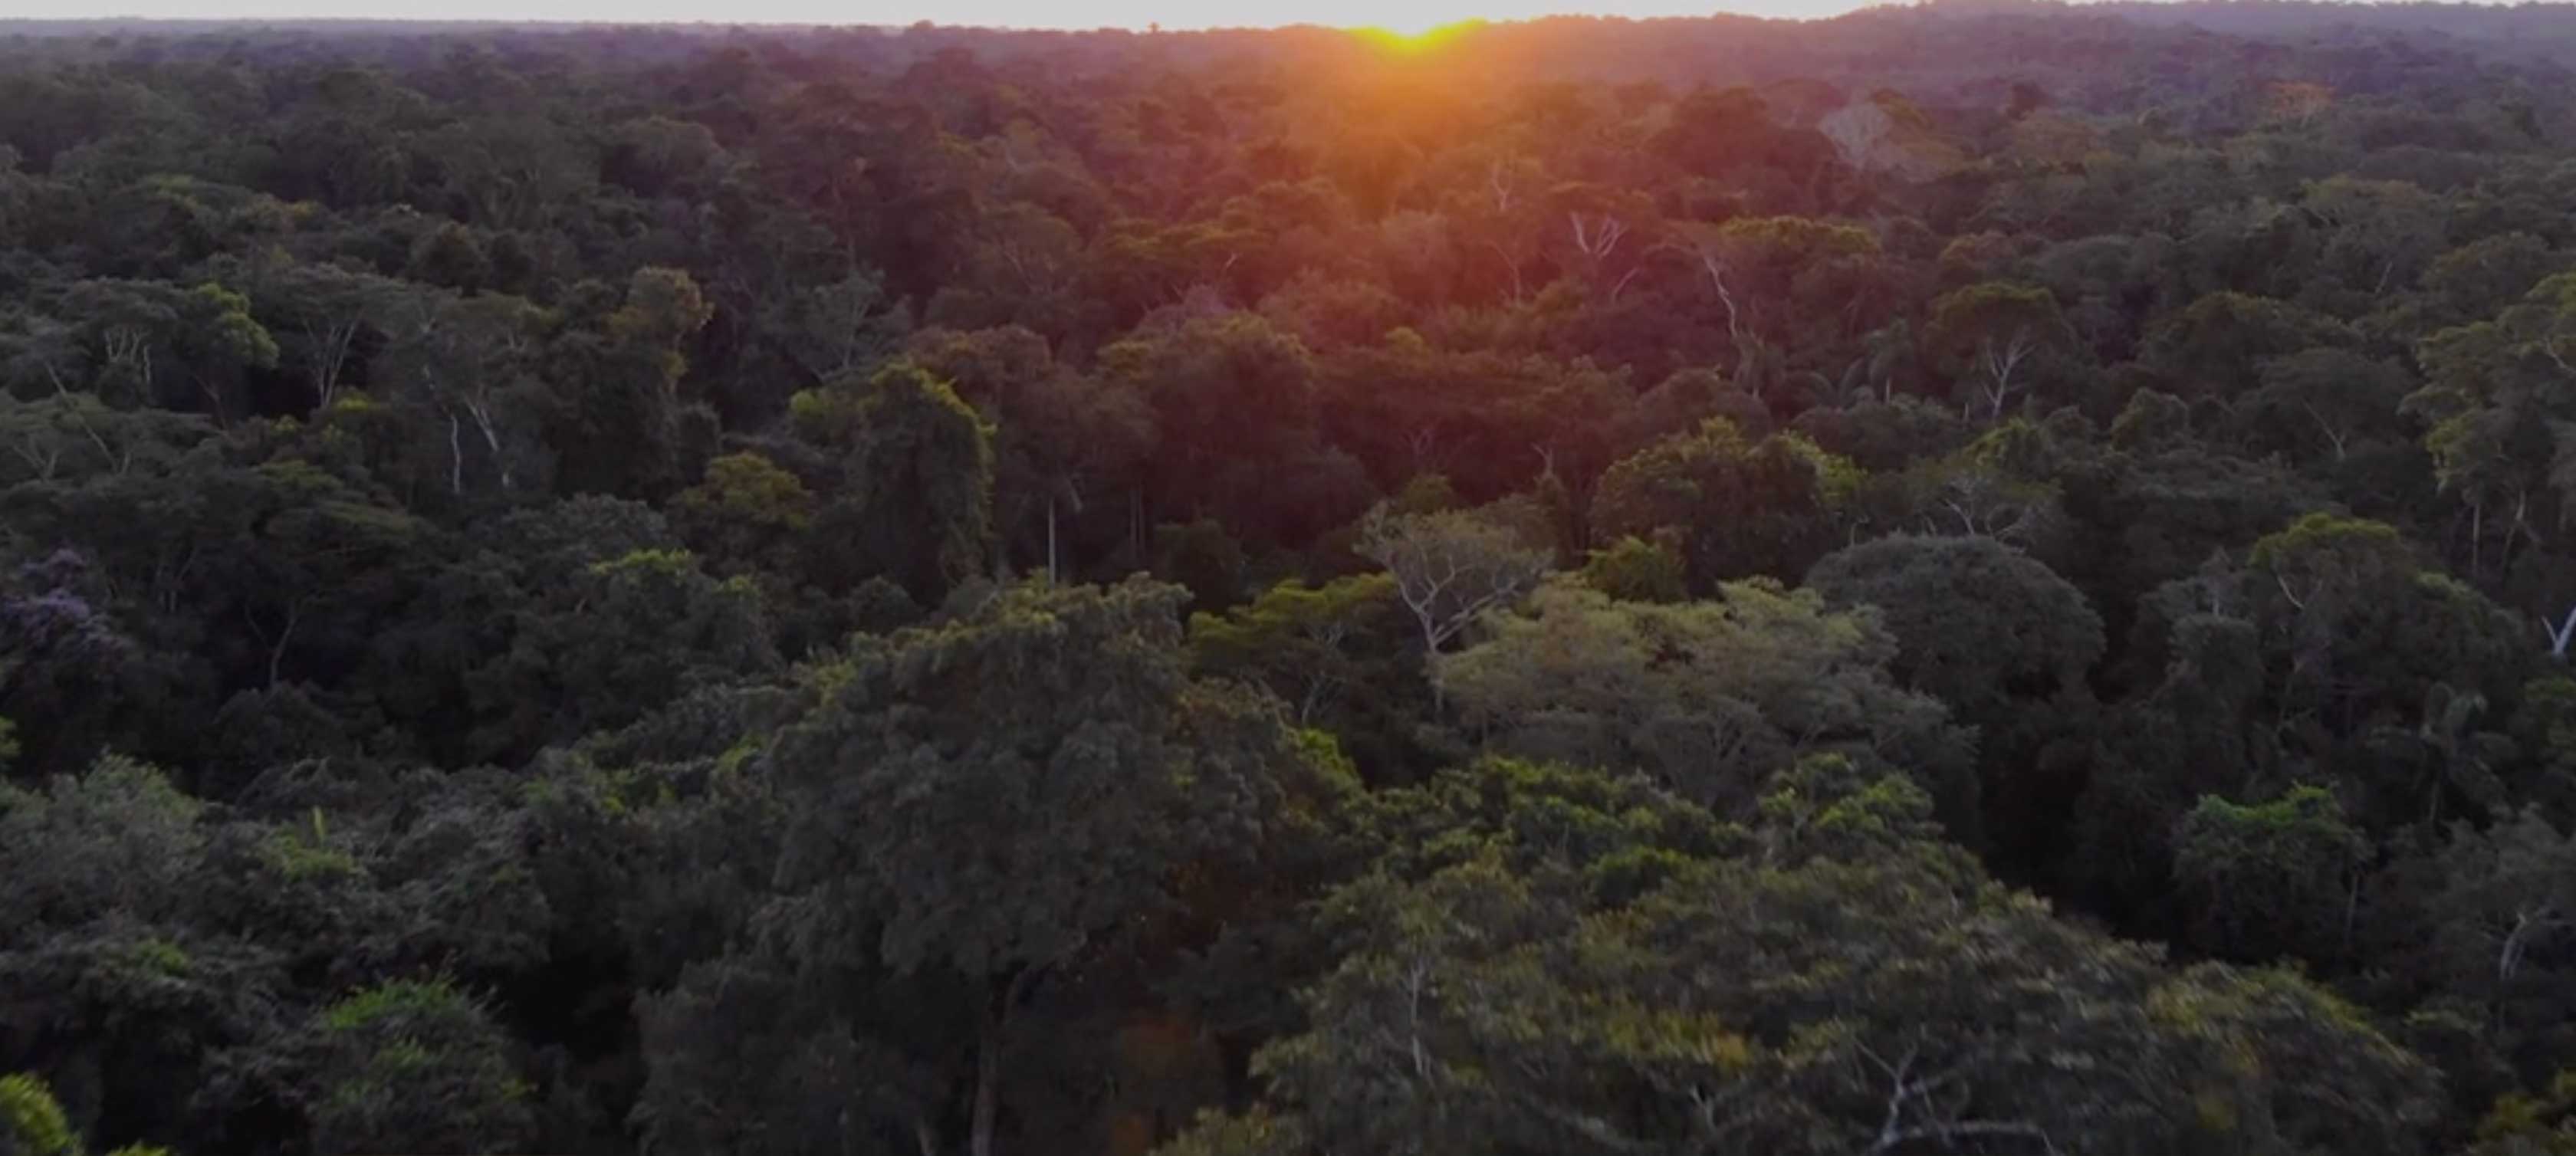 This image shows a drone shot of the Amazon Jungle in sunset